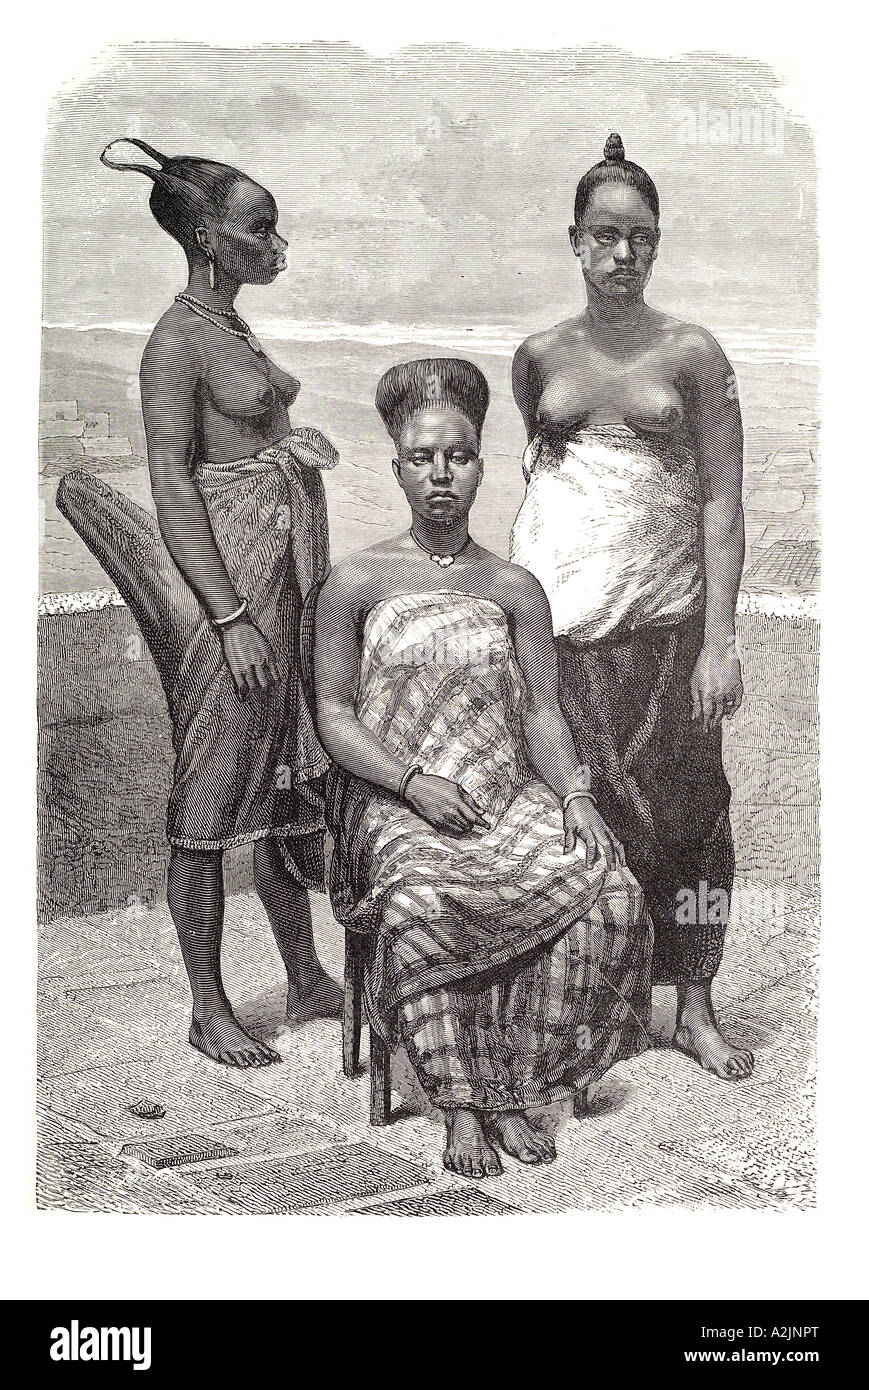 Local women Ghana bare breast Africa African stand pose formal seated chair  west skirt dress local benin bight coast Stock Photo - Alamy